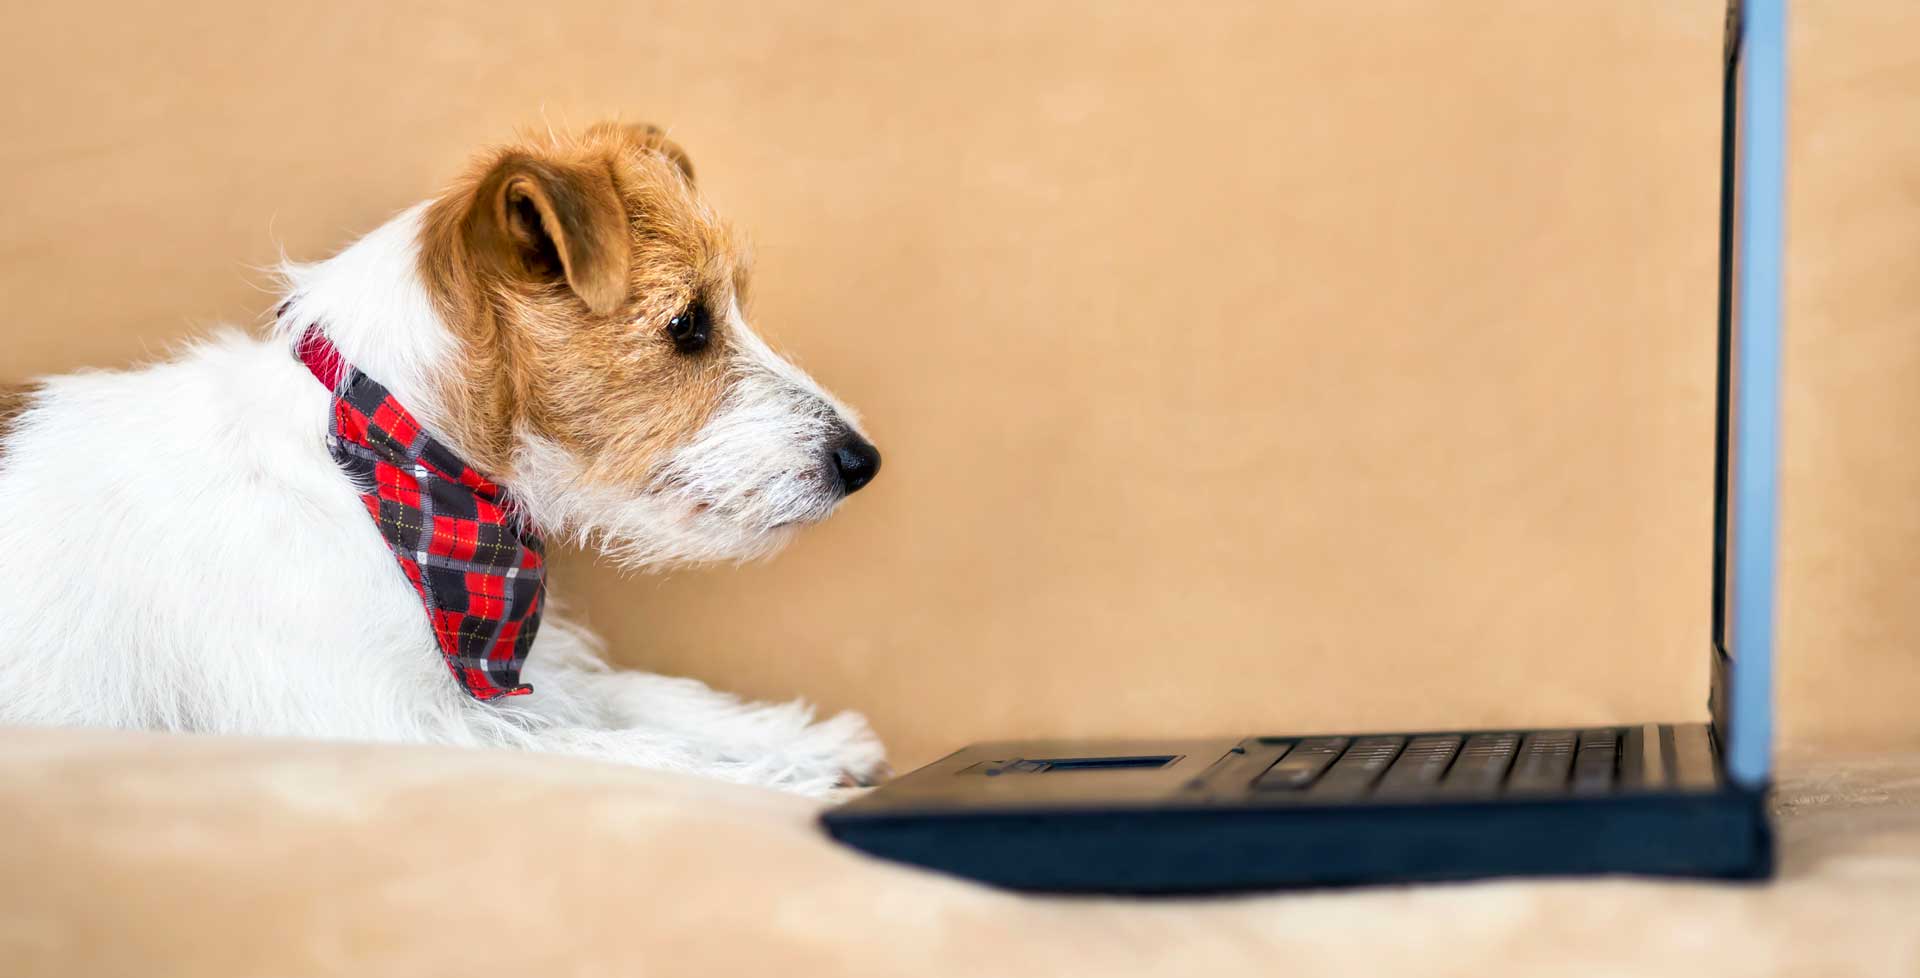 Small dog looking at a laptop